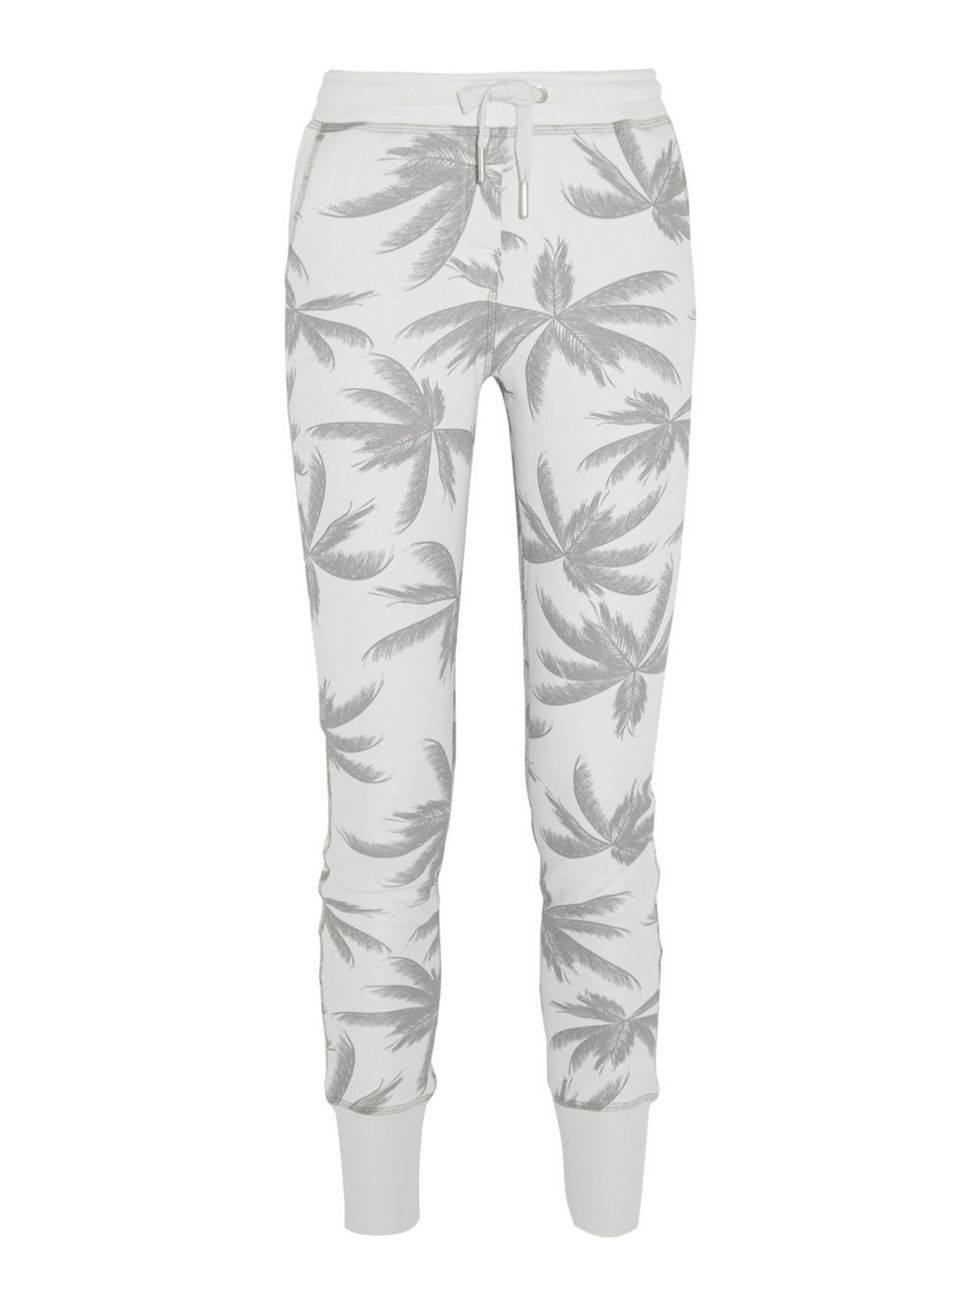 Trousers, Textile, Camouflage, White, Standing, Style, Pattern, Military camouflage, Active pants, Pocket, 